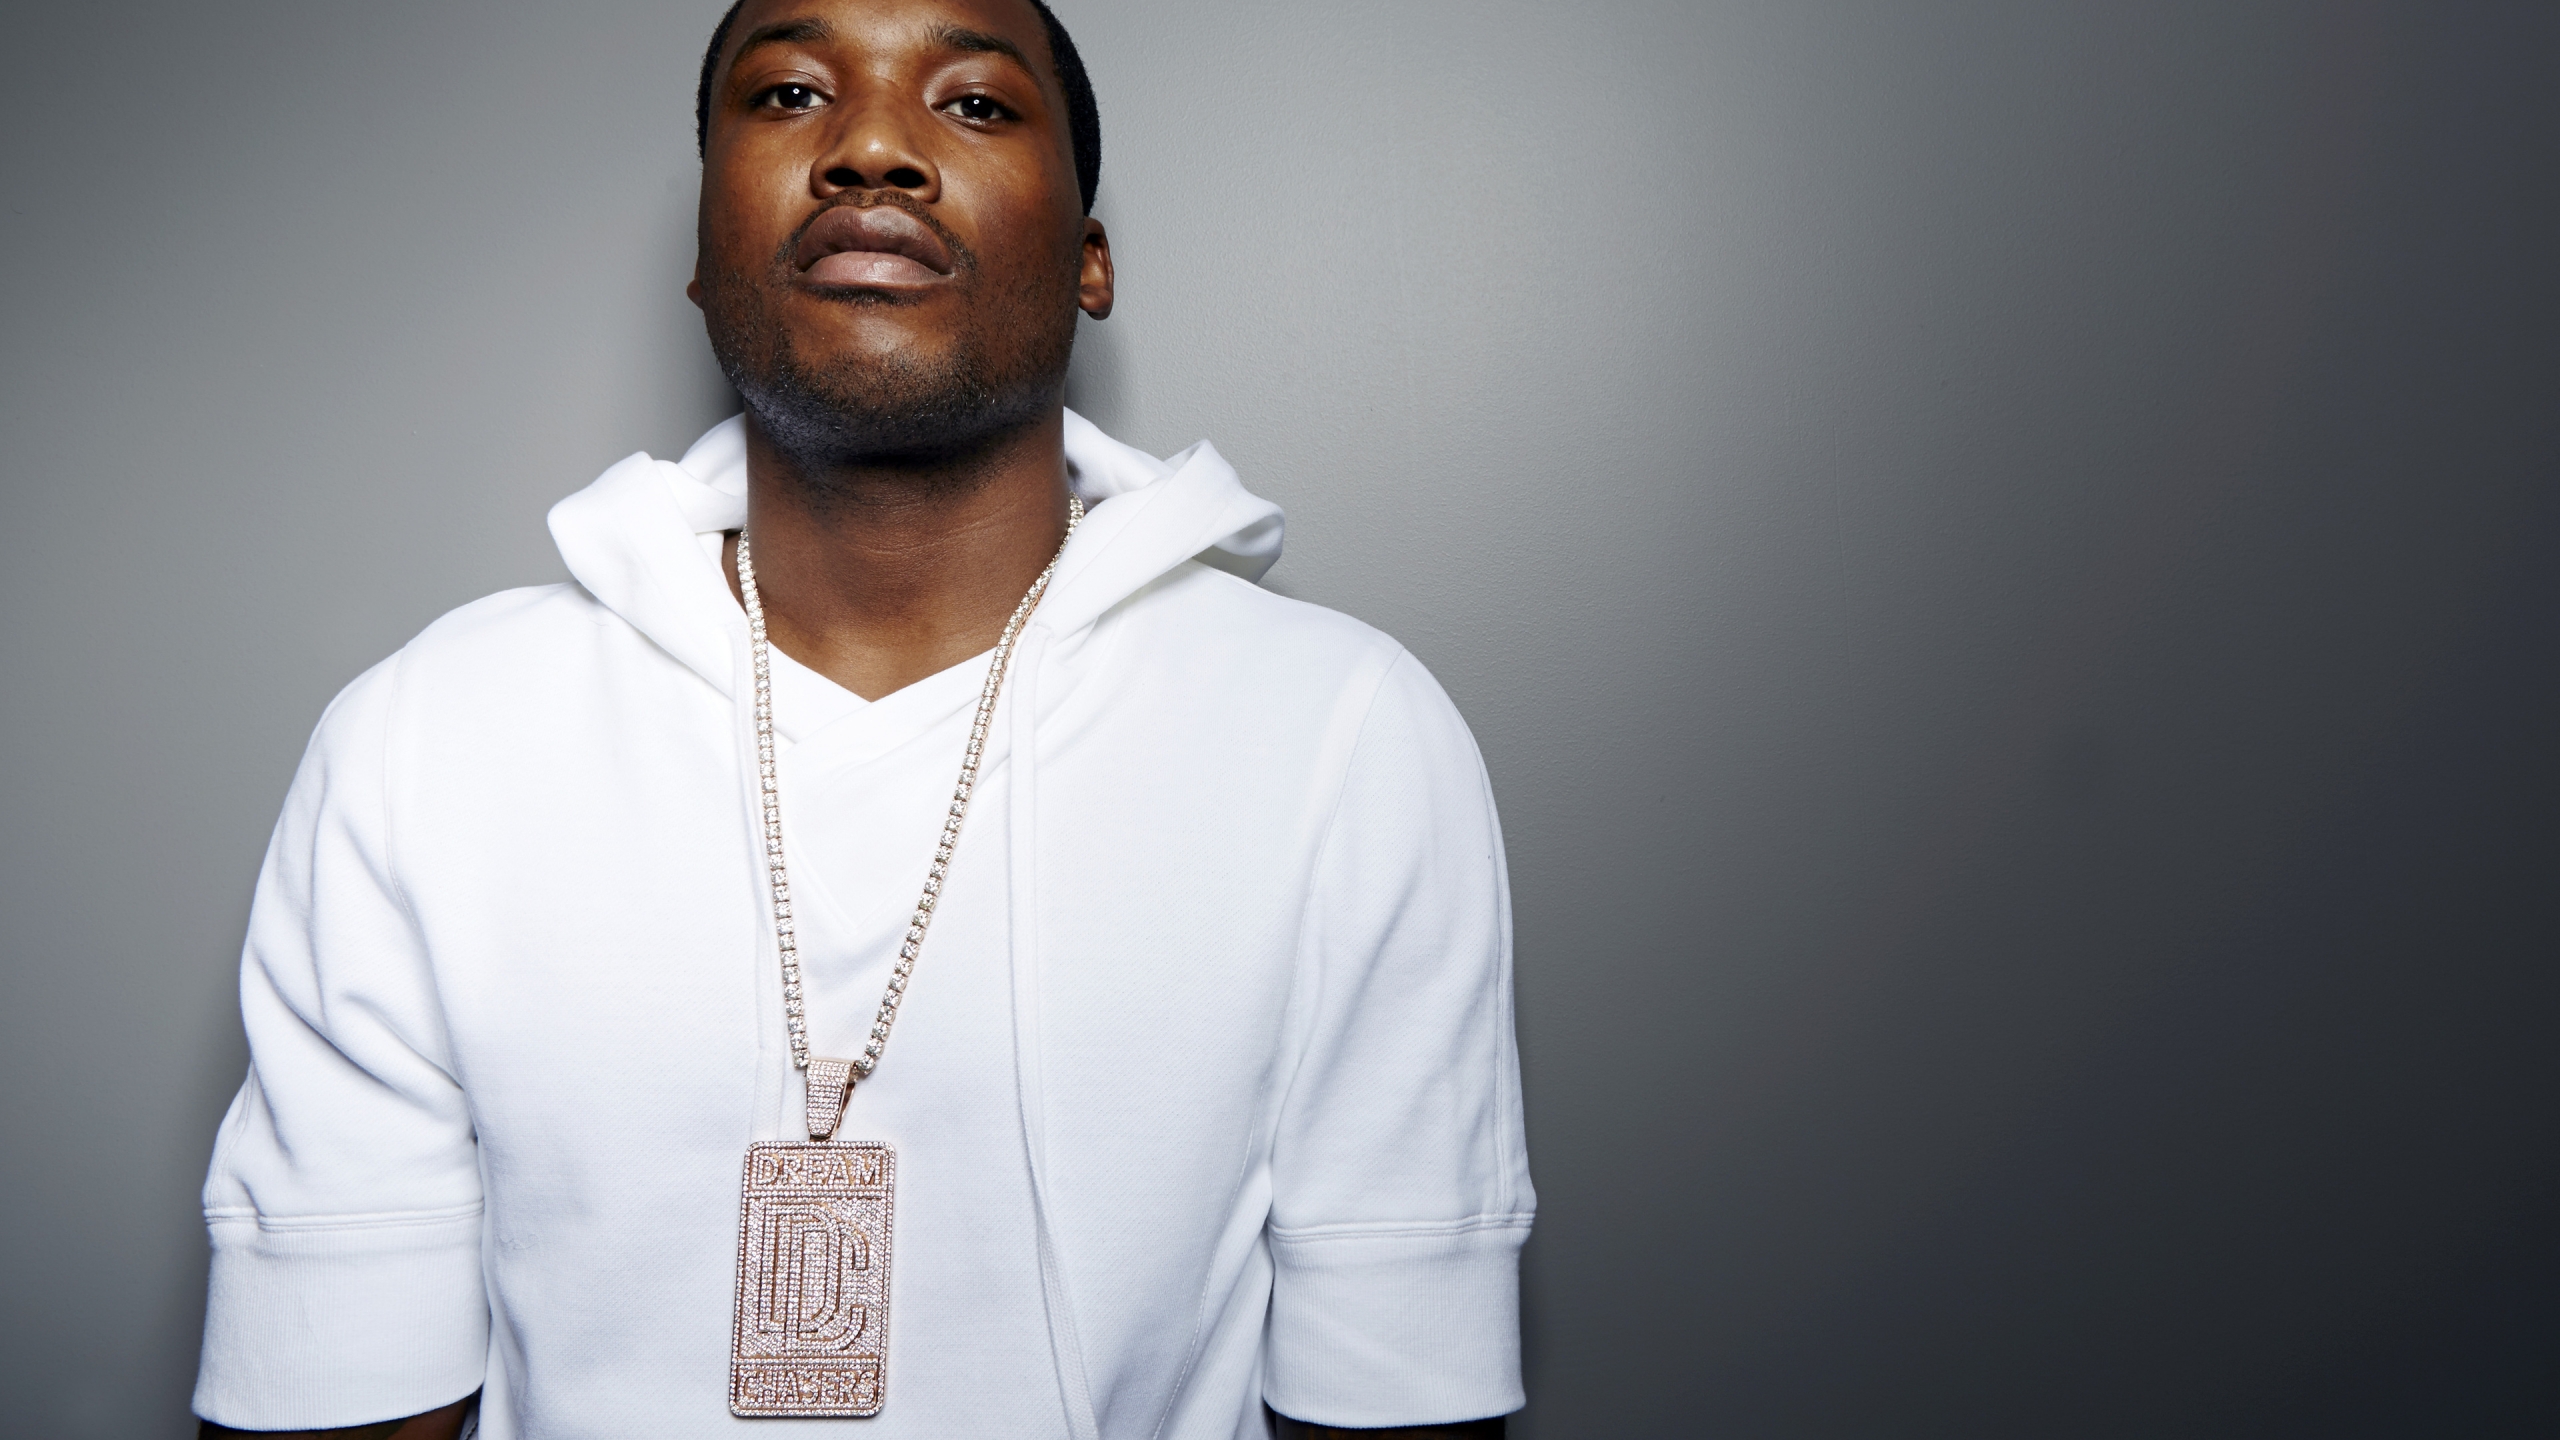 Meek Mill Look for 2560x1440 HDTV resolution